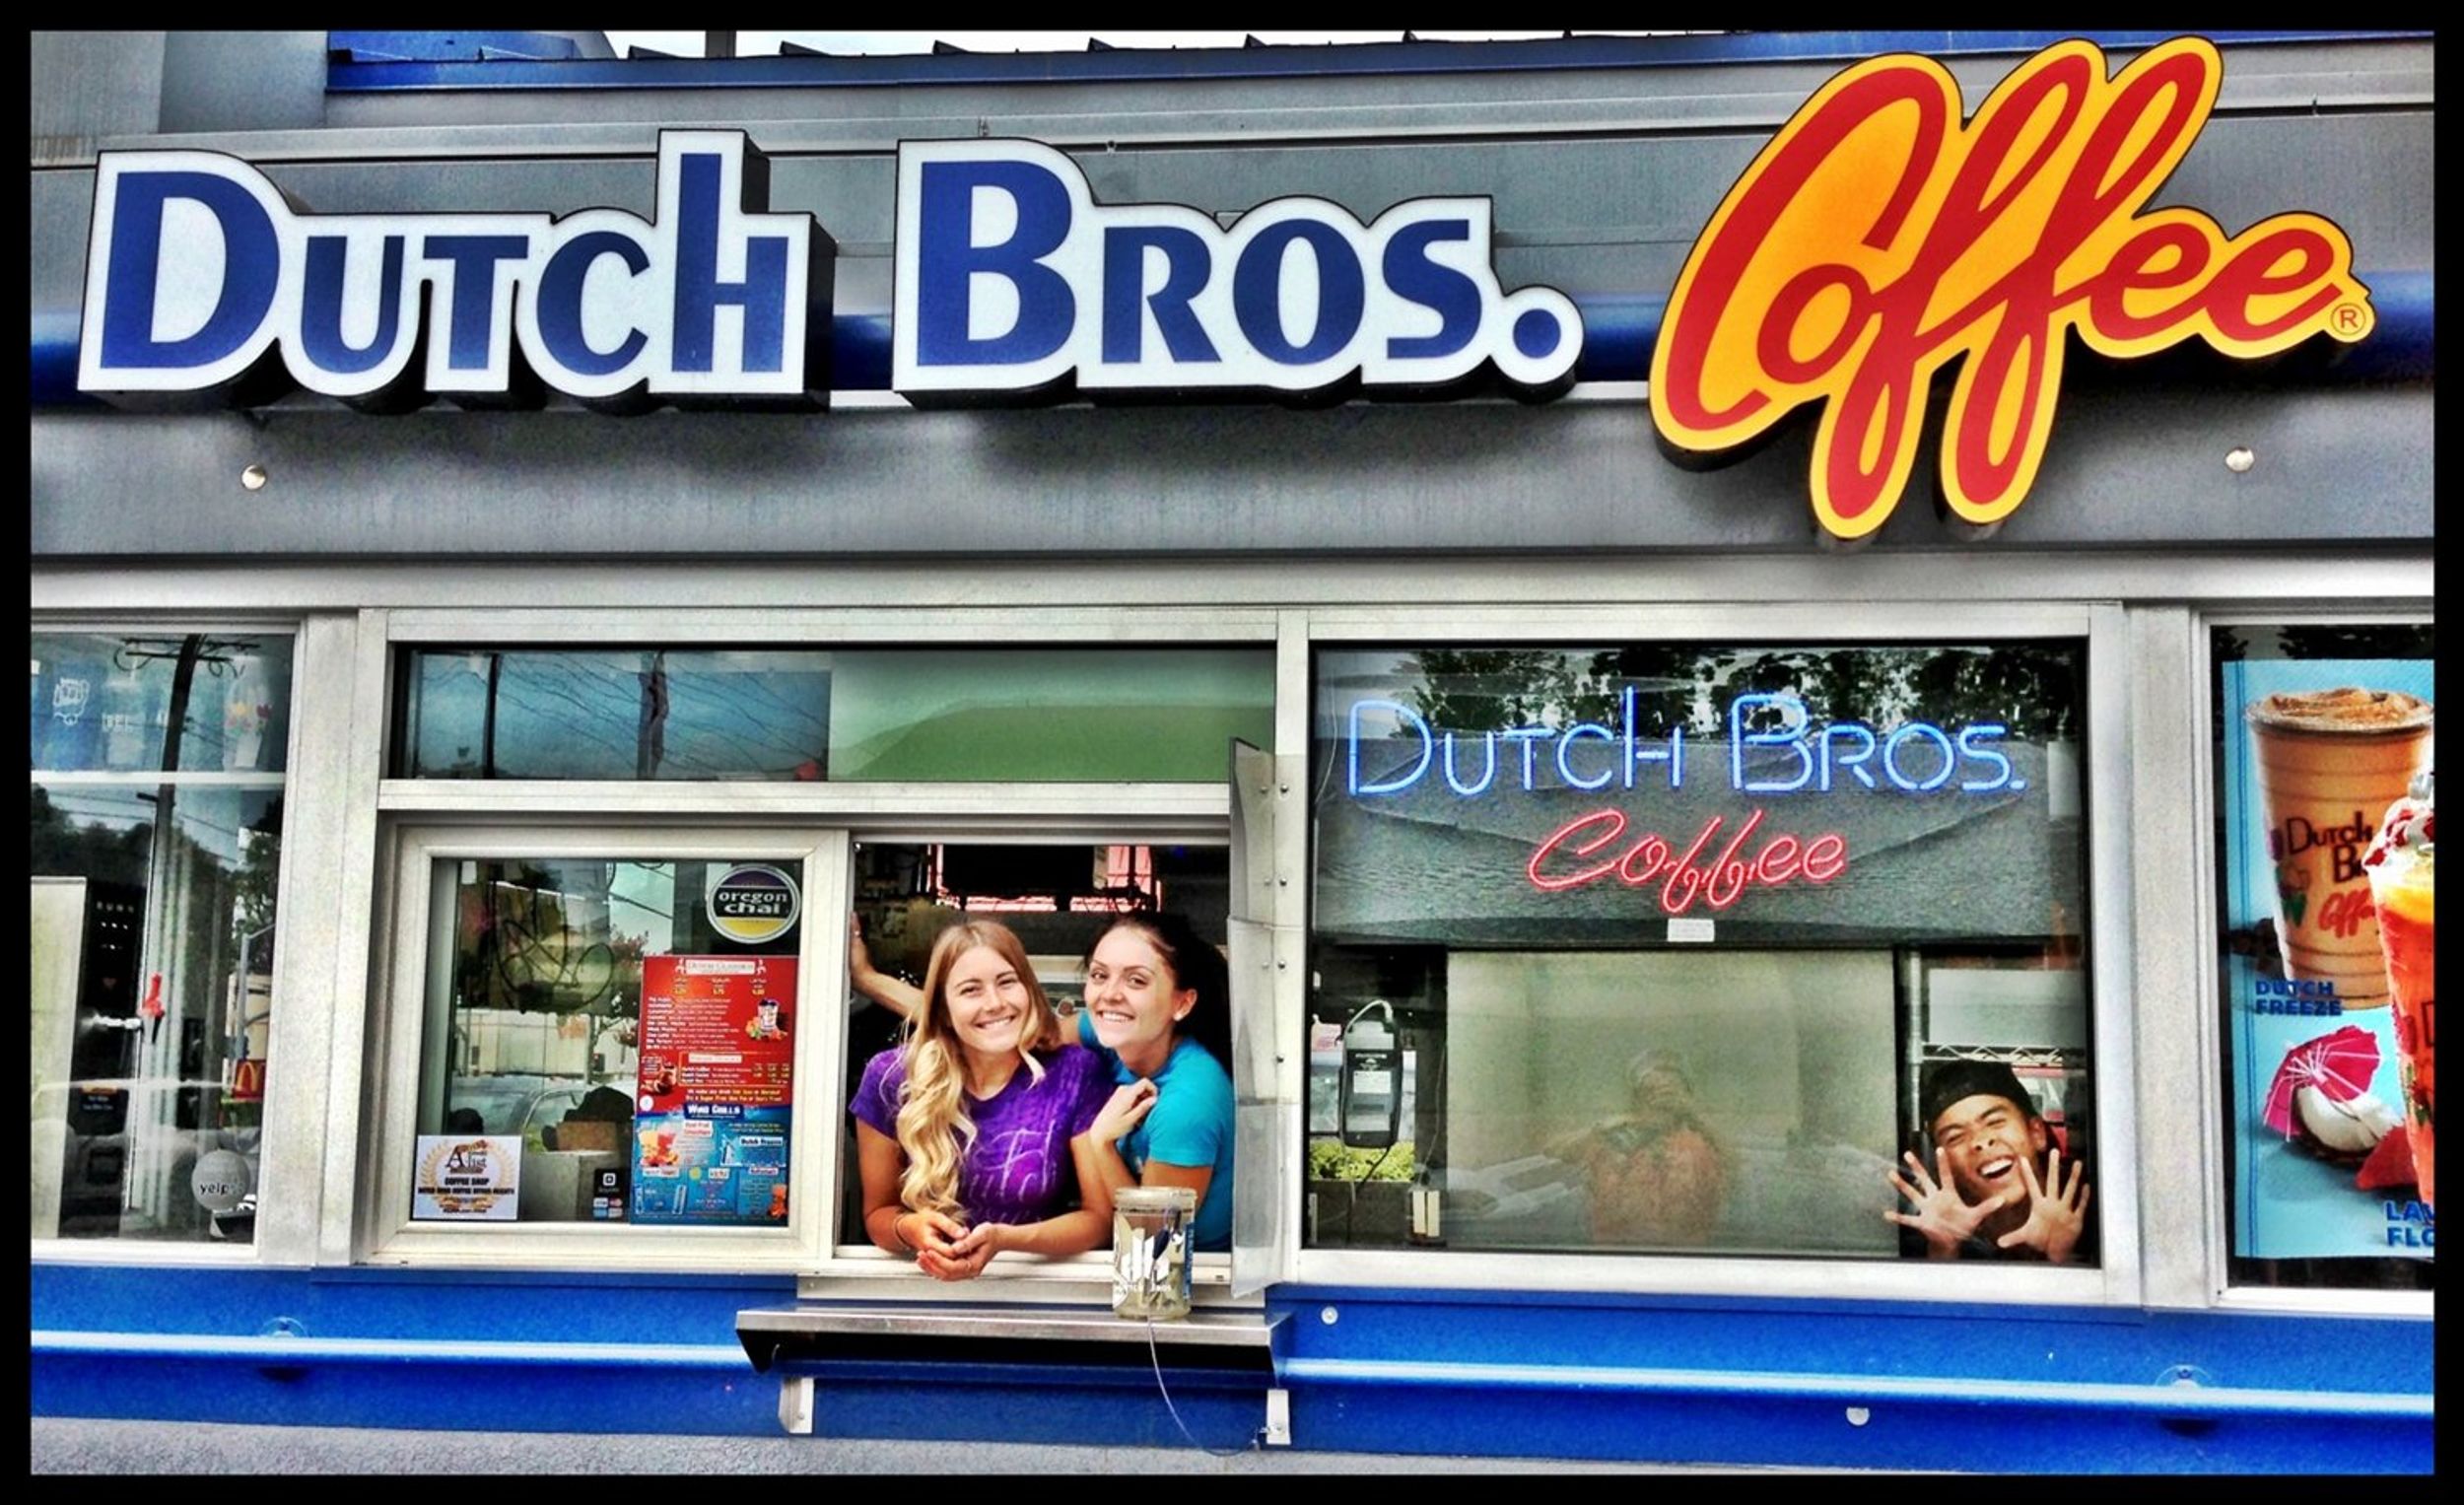 12 Reasons Why Dutch Bros Coffee is Better than Starbucks